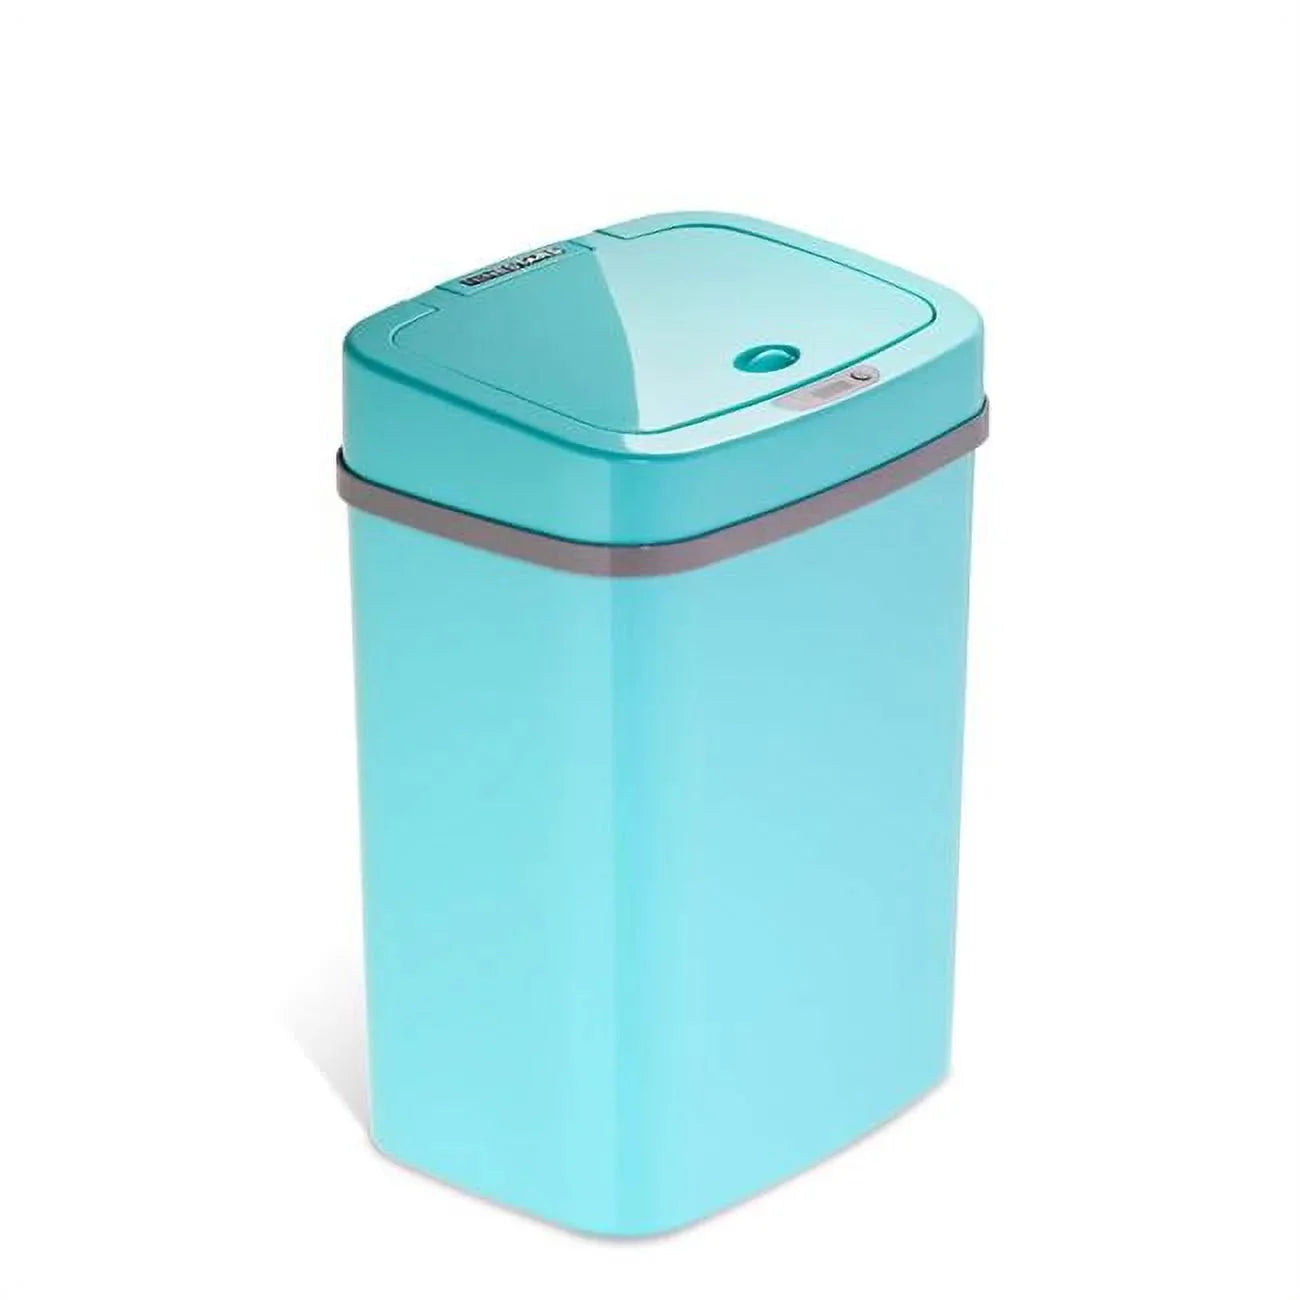 Wholesale prices with free shipping all over United States Nine Stars 3.2 Gallon Trash Can, Plastic Touchless Bathroom Trash Can, Teal - Steven Deals